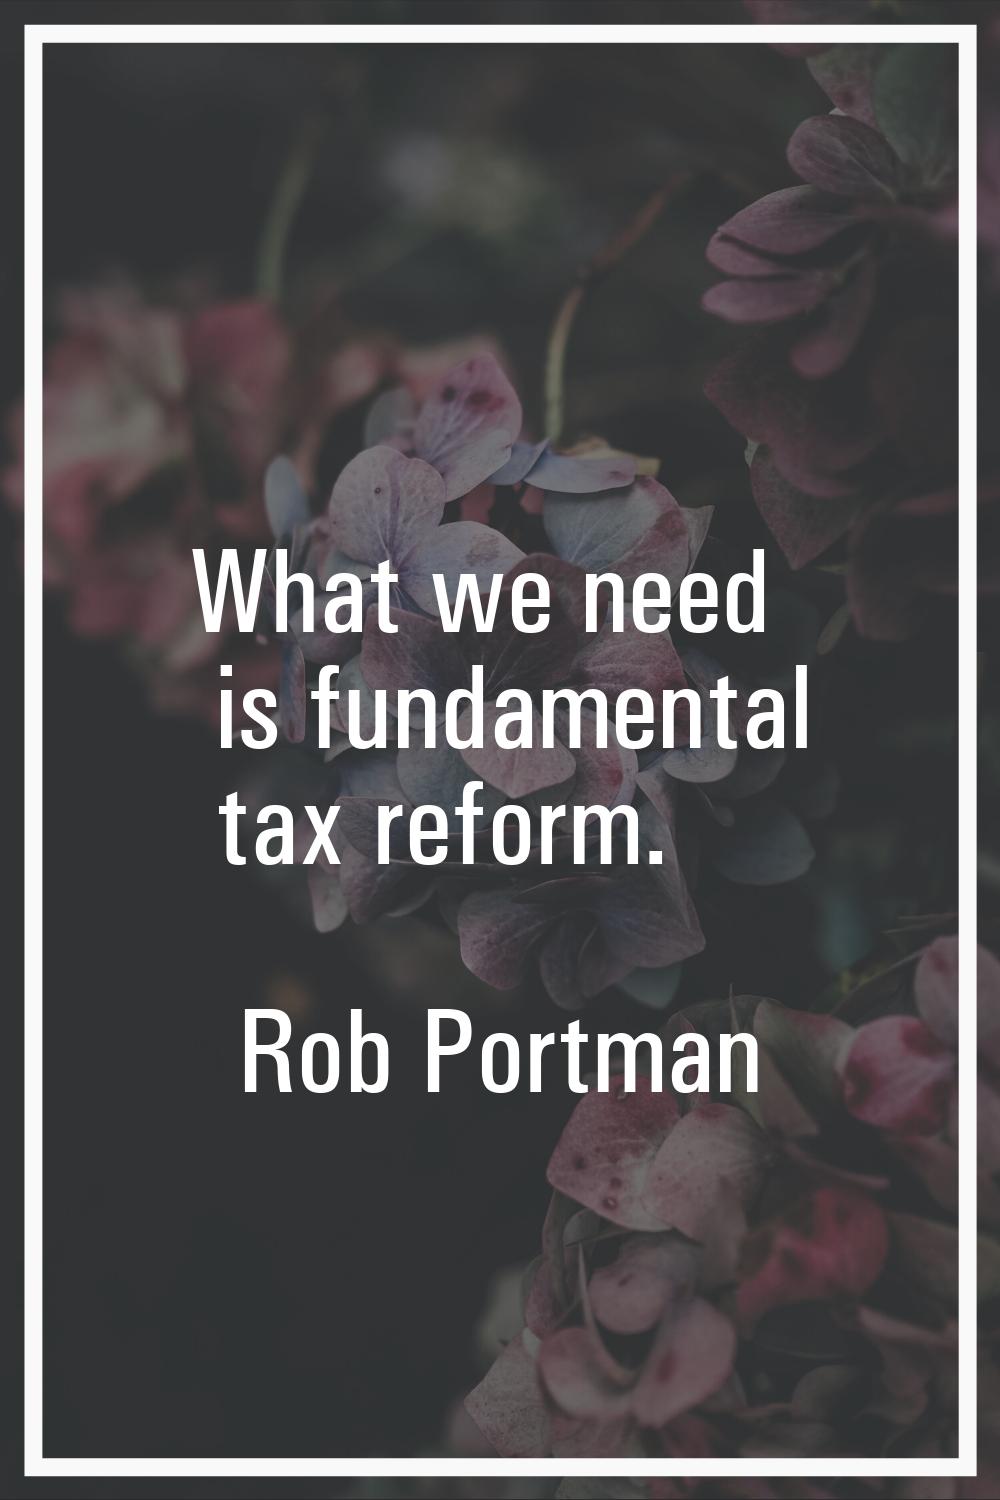 What we need is fundamental tax reform.